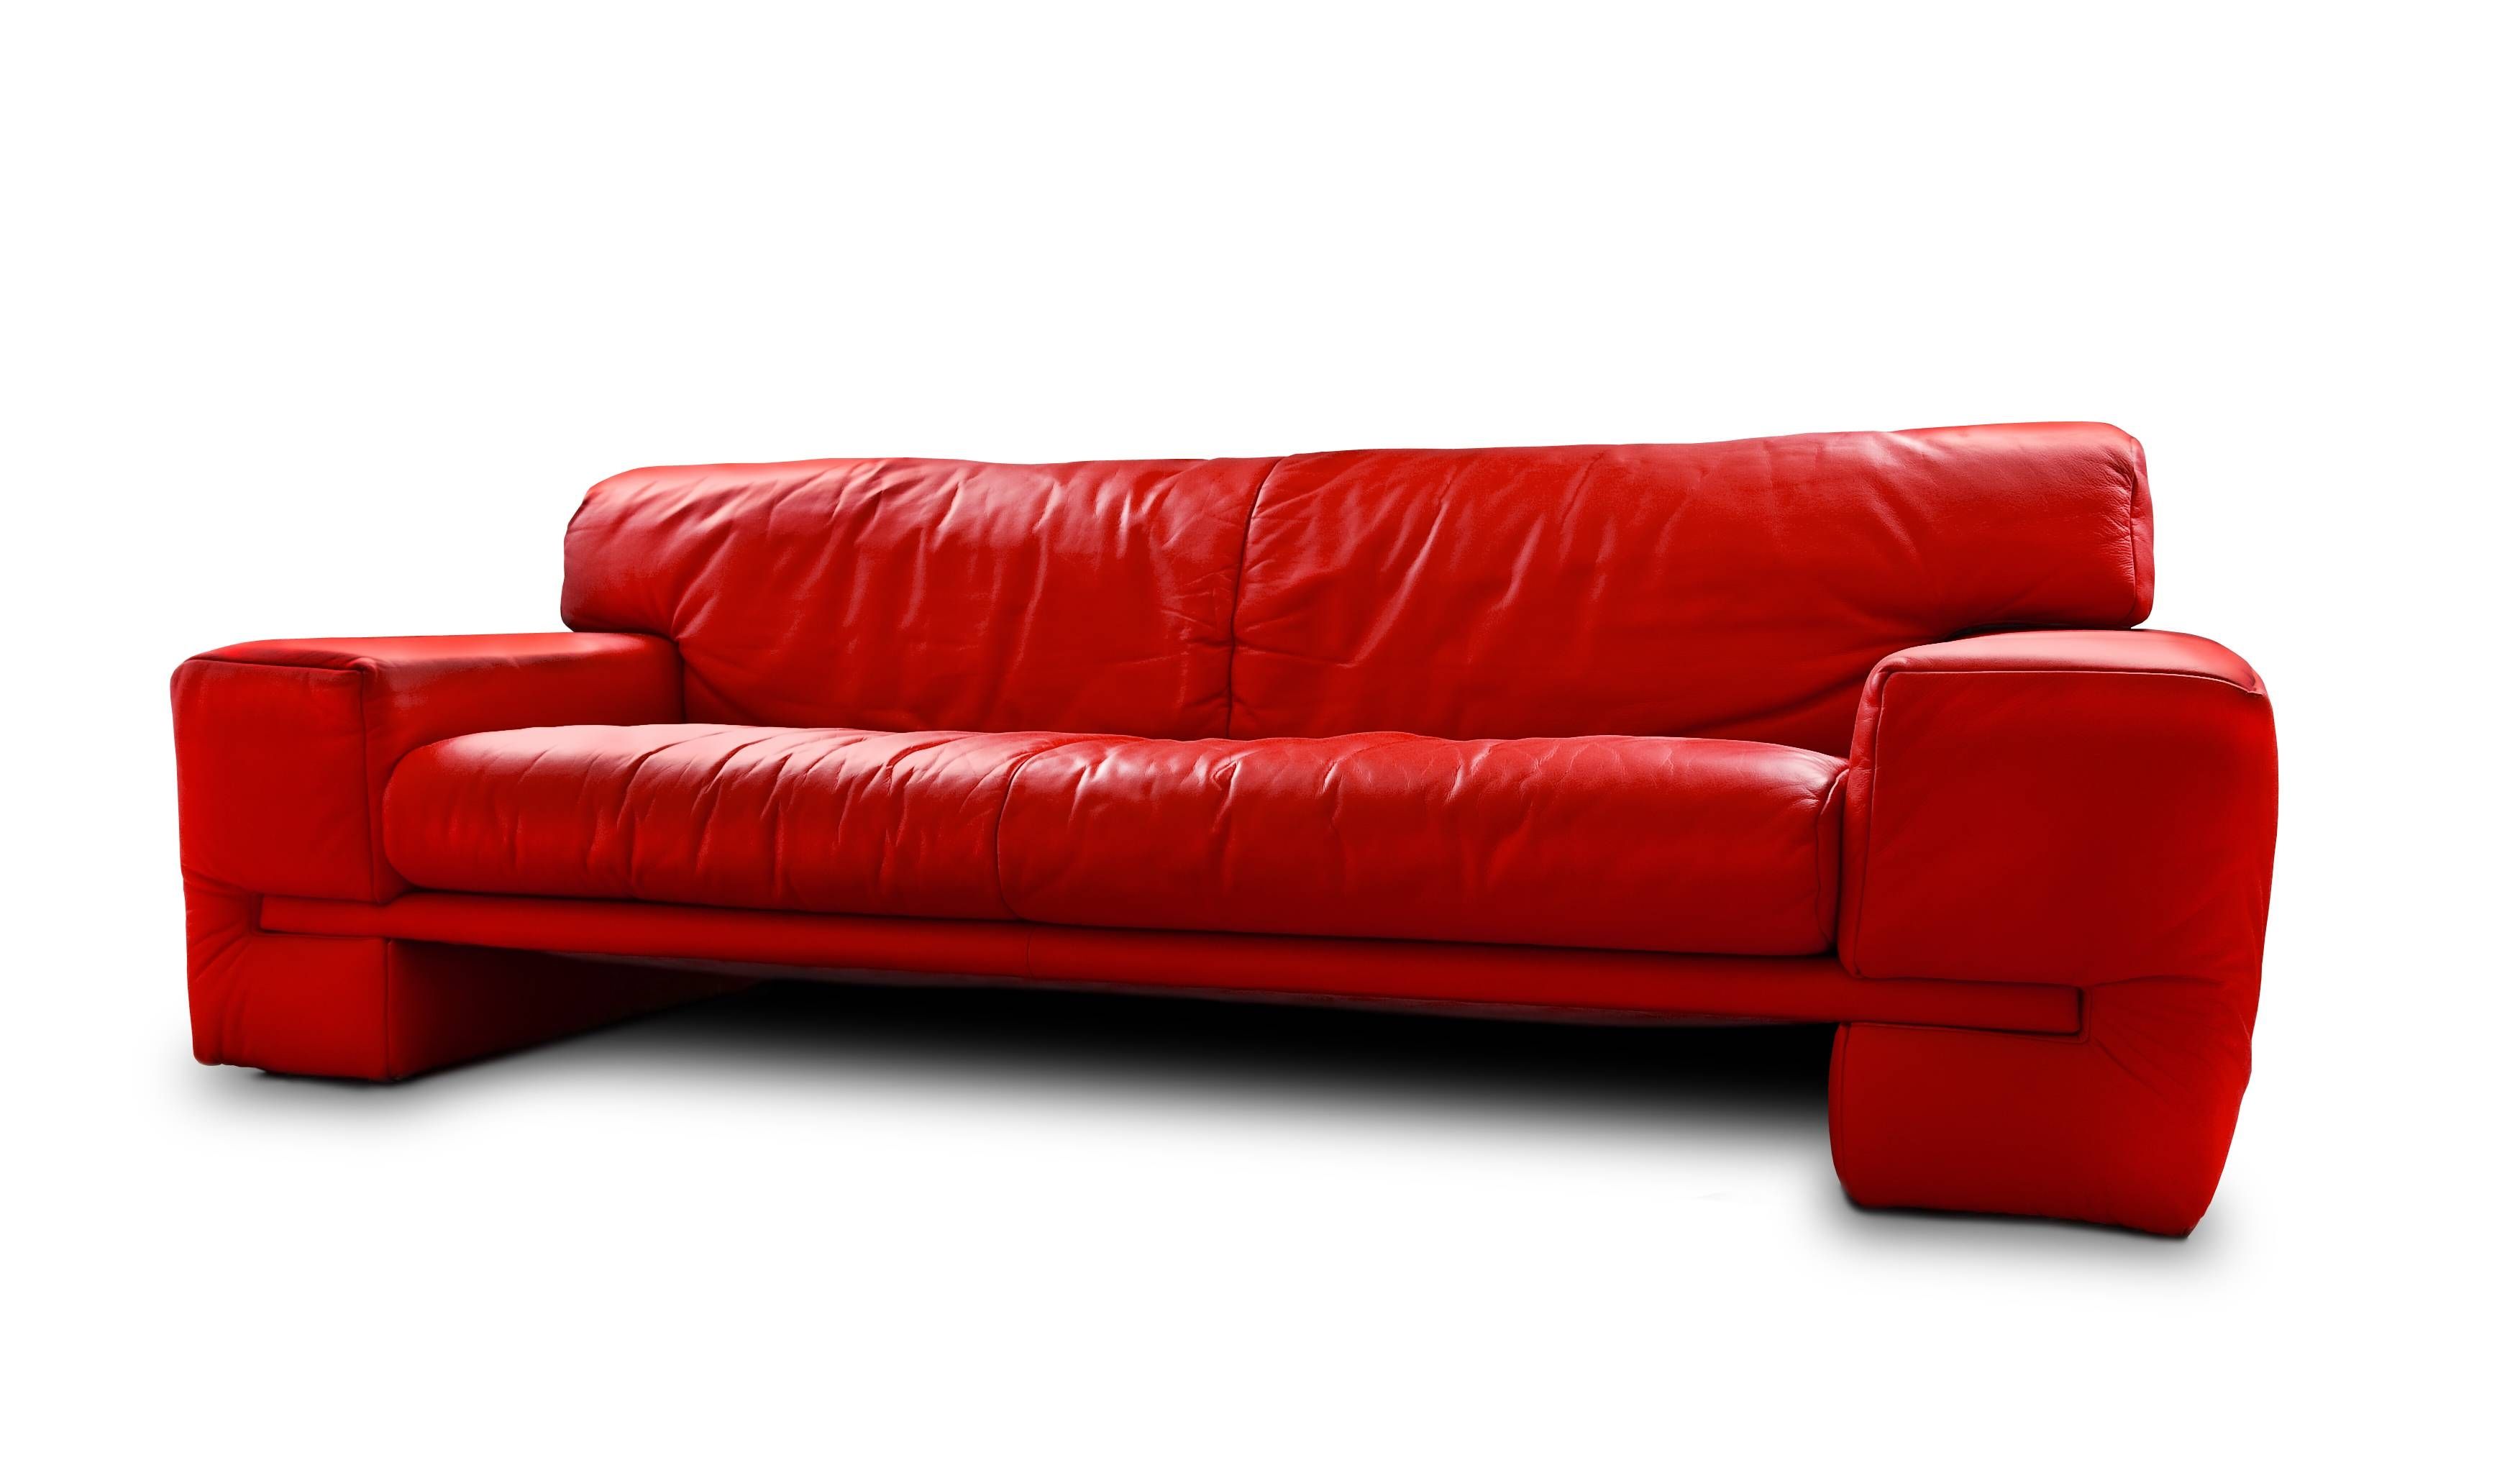 Sofas Center : Red Sofa For Sale Cheap Beds Tufted Bedred Salered Inside Red Sofa Beds Ikea (View 26 of 30)